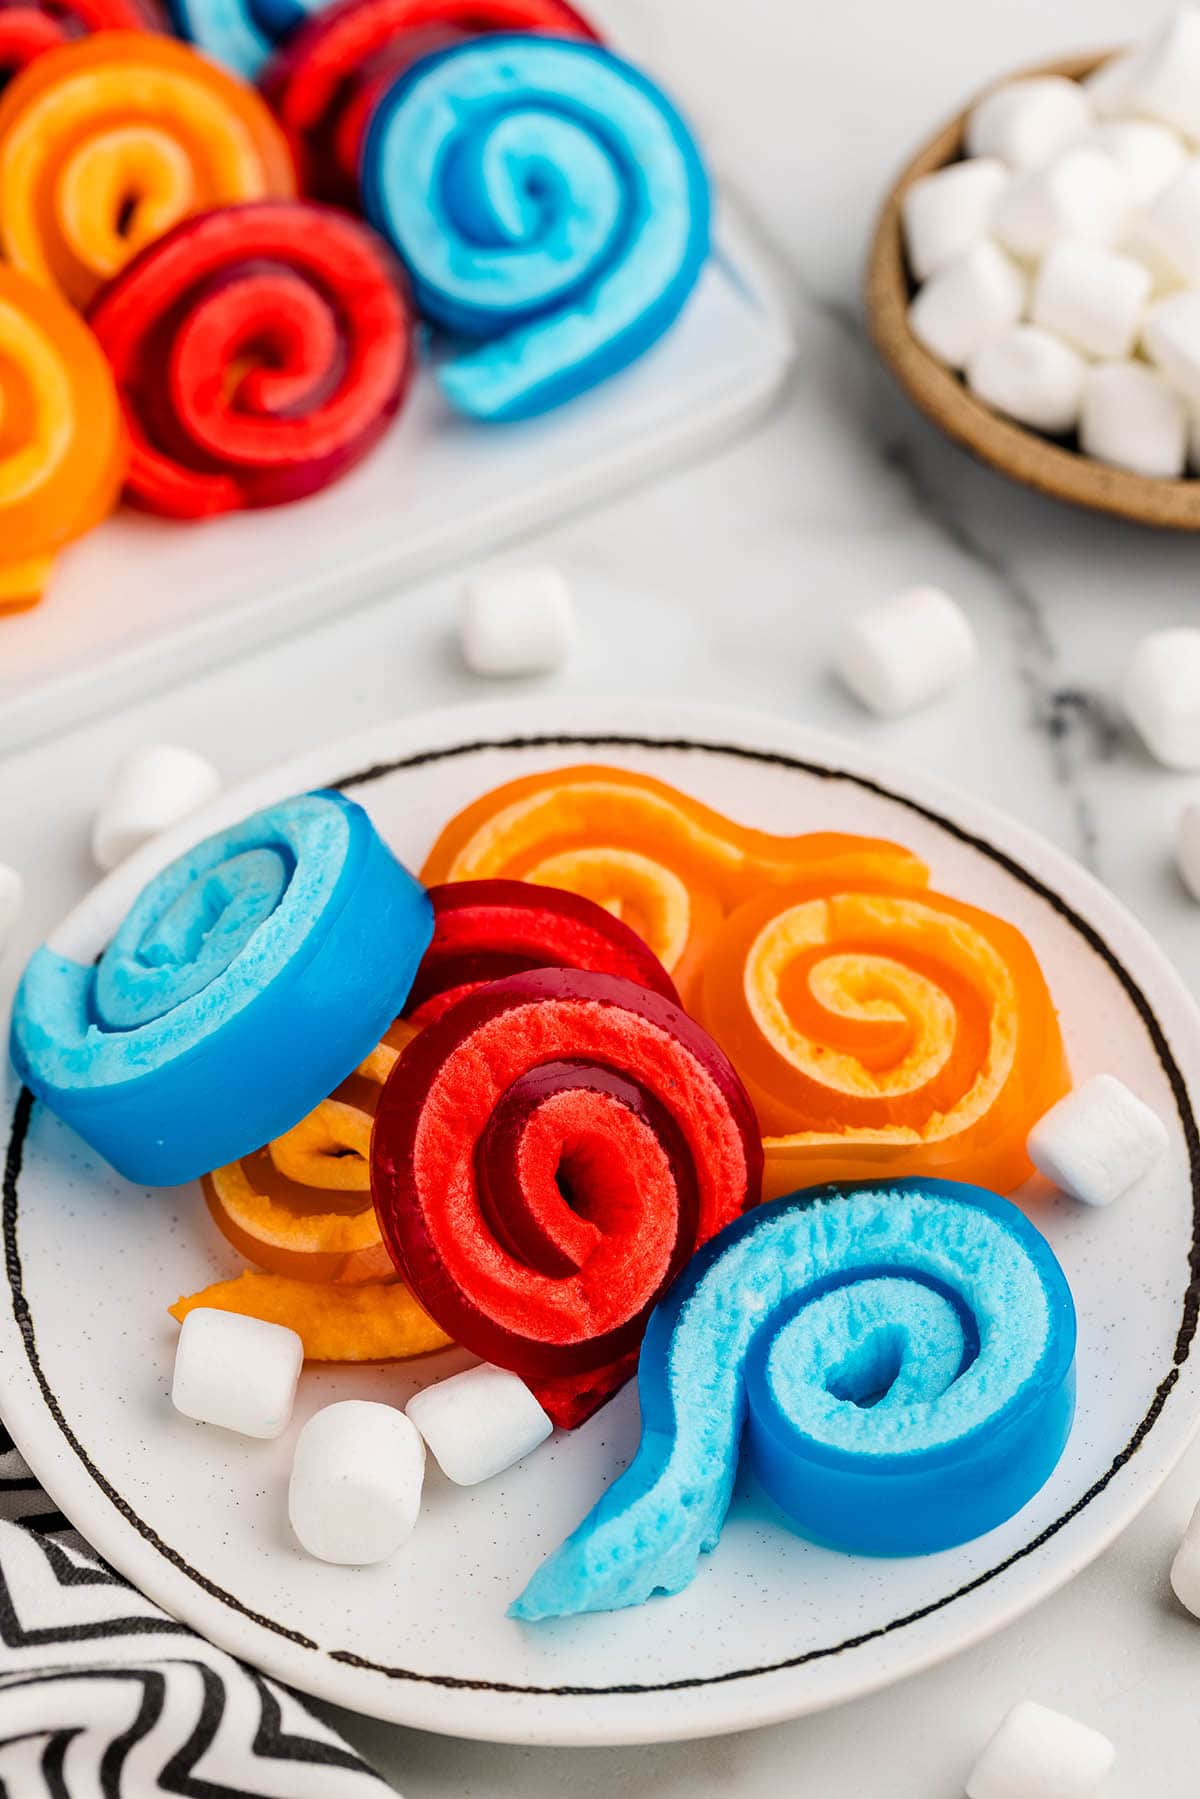 blue, red and orange jello roll ups on a plate.